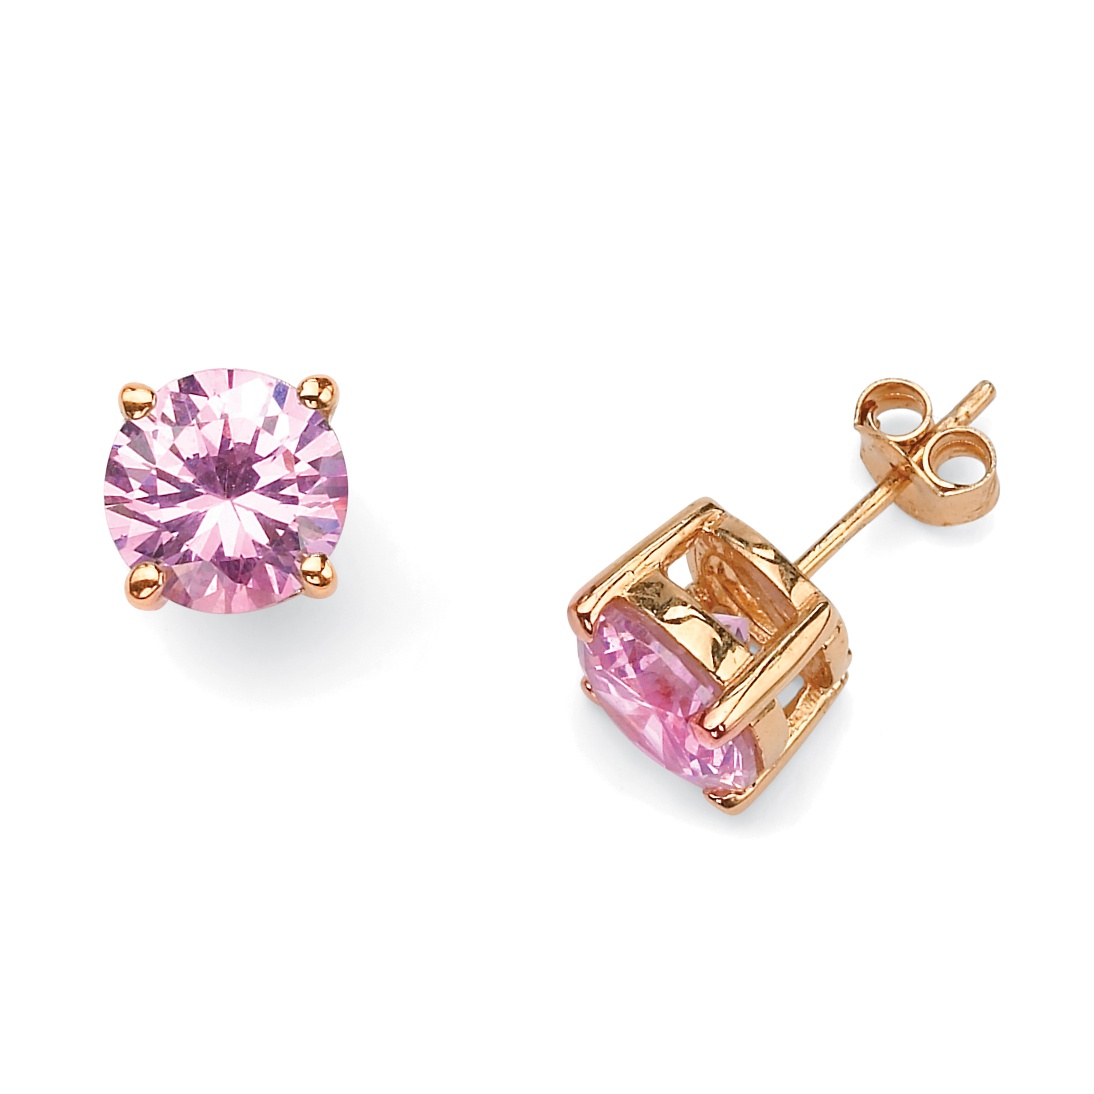 4 TCW Round Pink Cubic Zirconia 14k Yellow Gold-Plated Stud Earrings